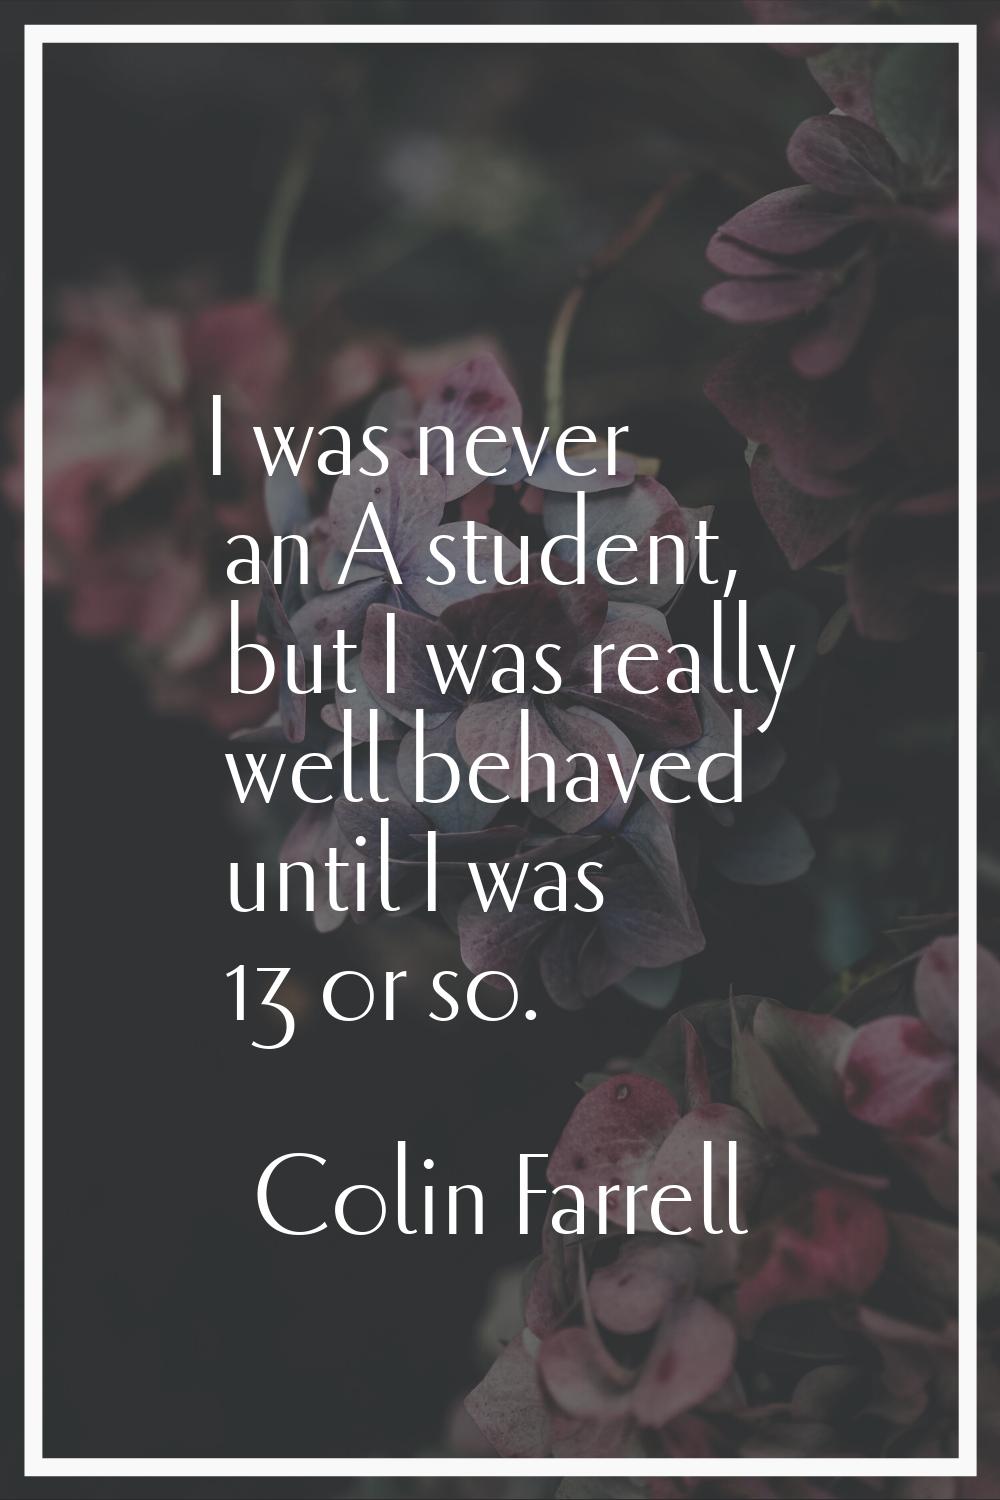 I was never an A student, but I was really well behaved until I was 13 or so.